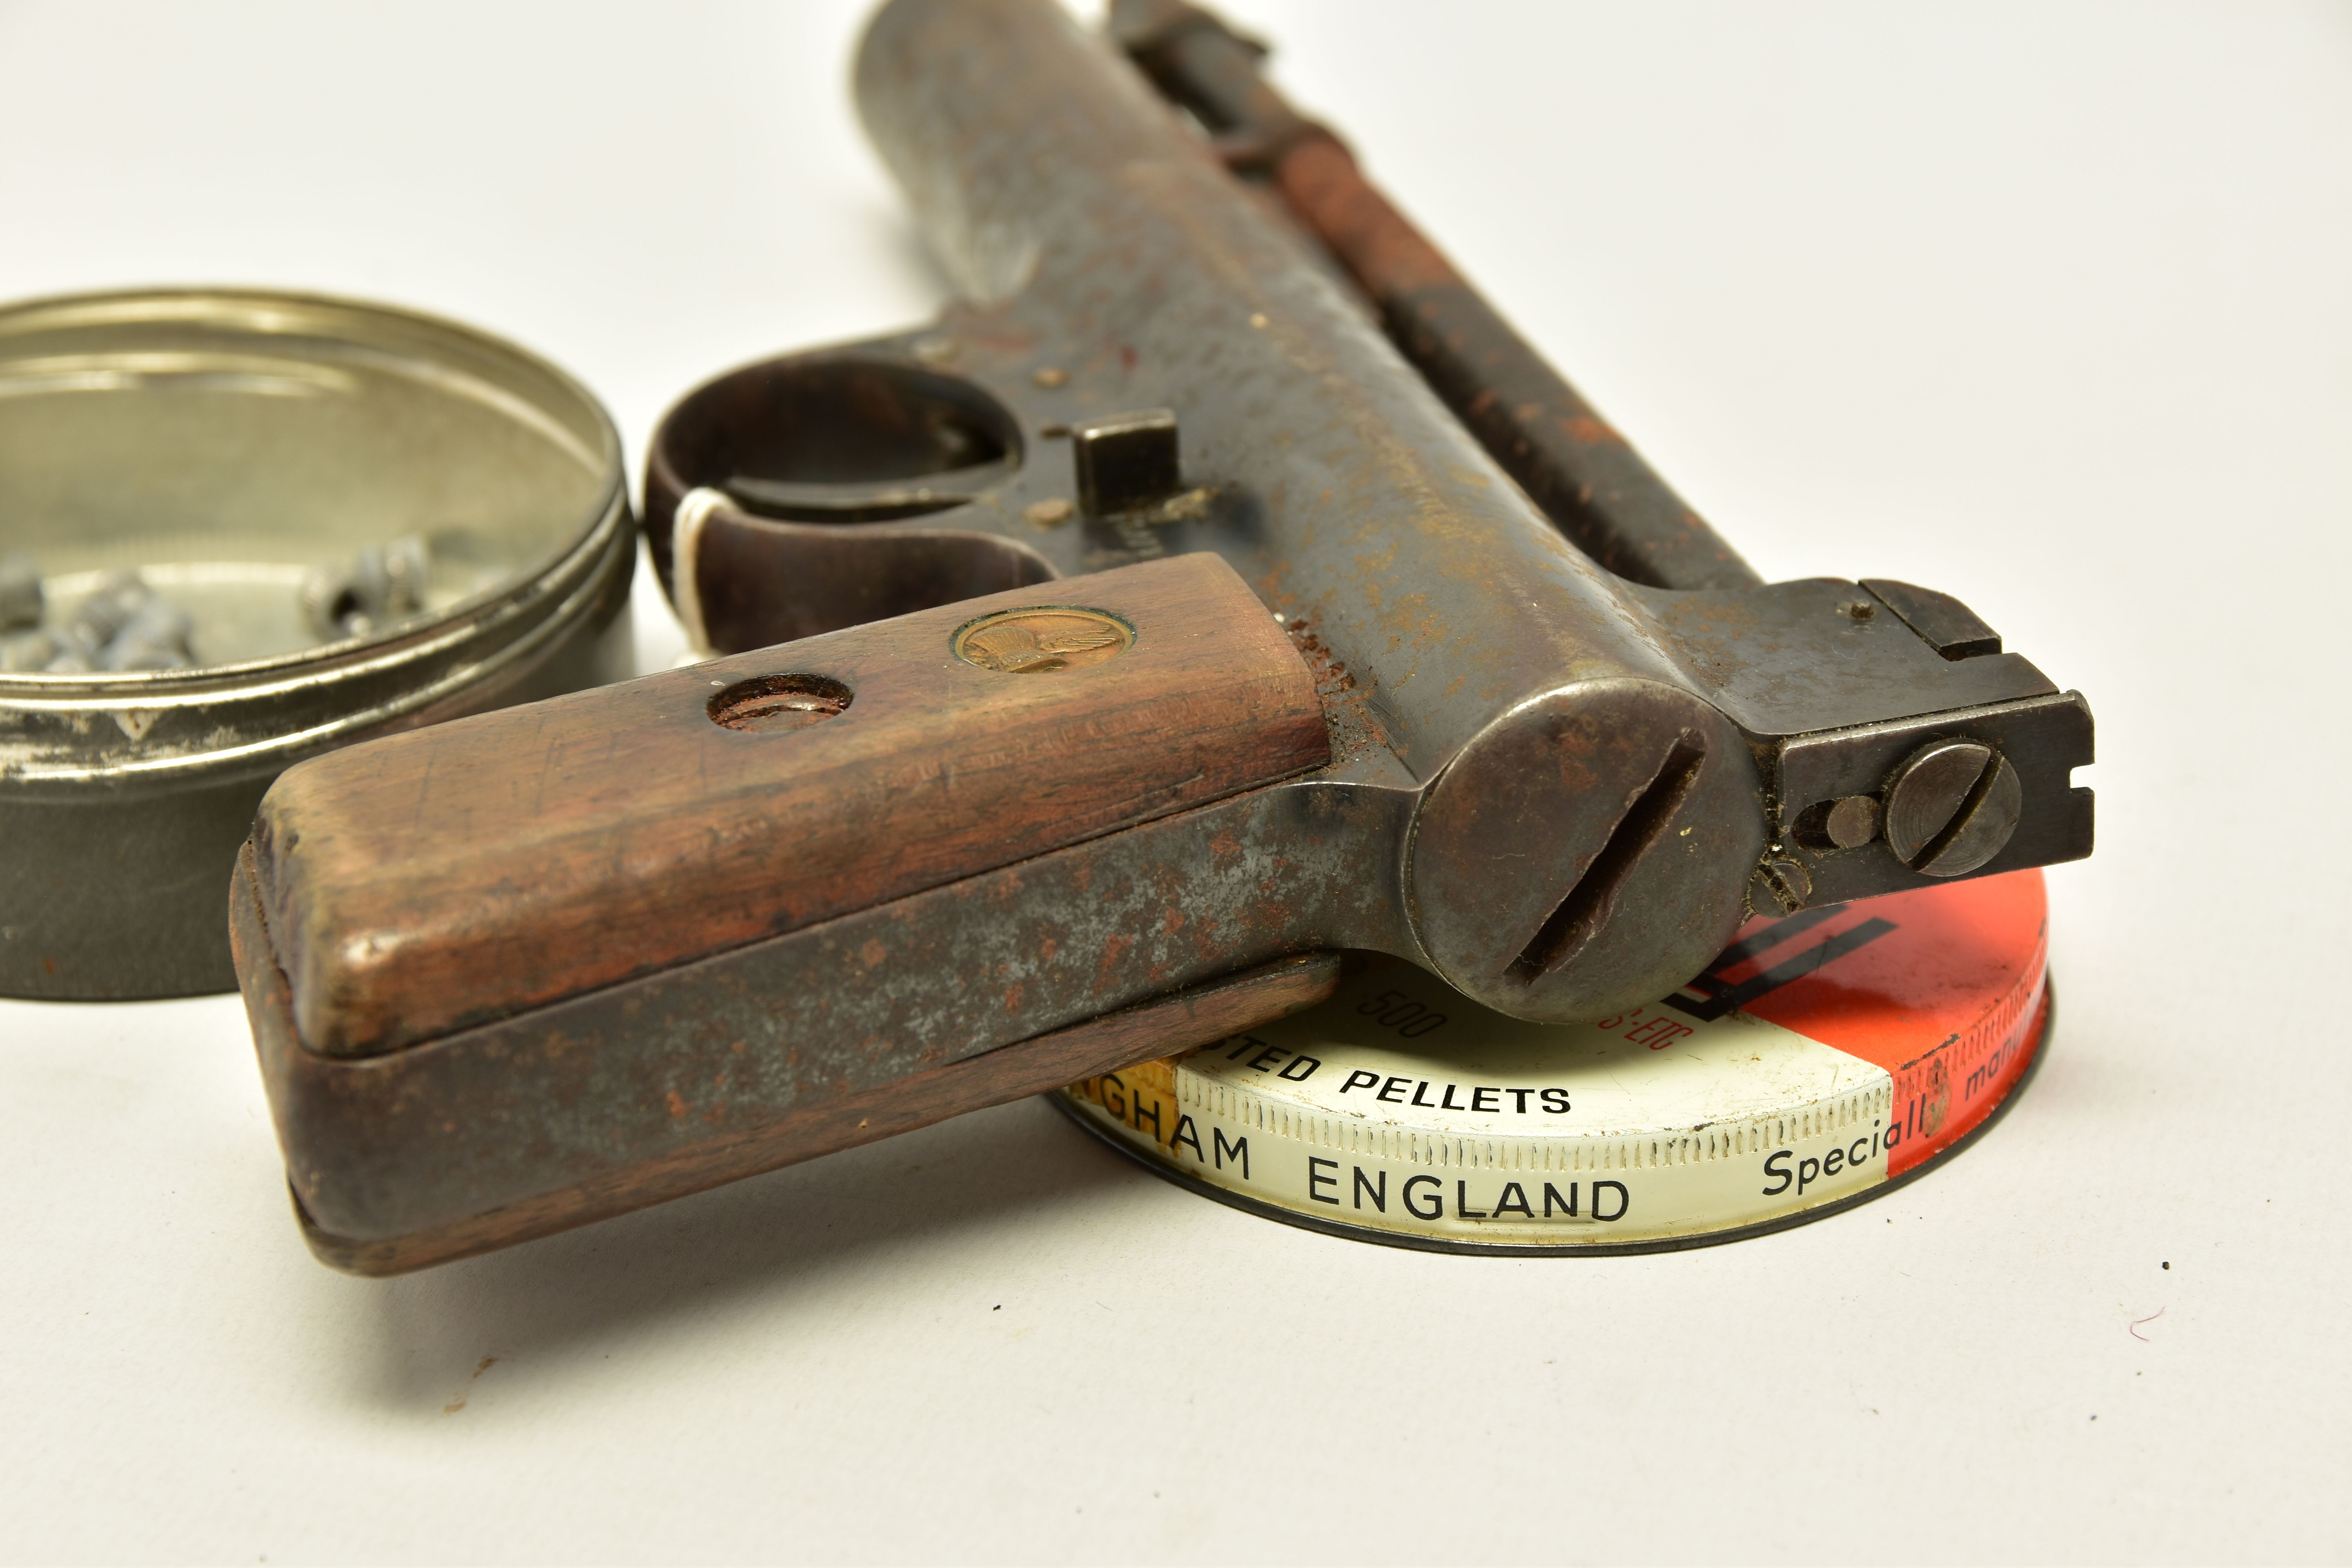 A .22 WEBLEY & SCOTT MK 1 AIR PISTOL, pre WWII, serial number 18387, in working order but with - Image 7 of 8